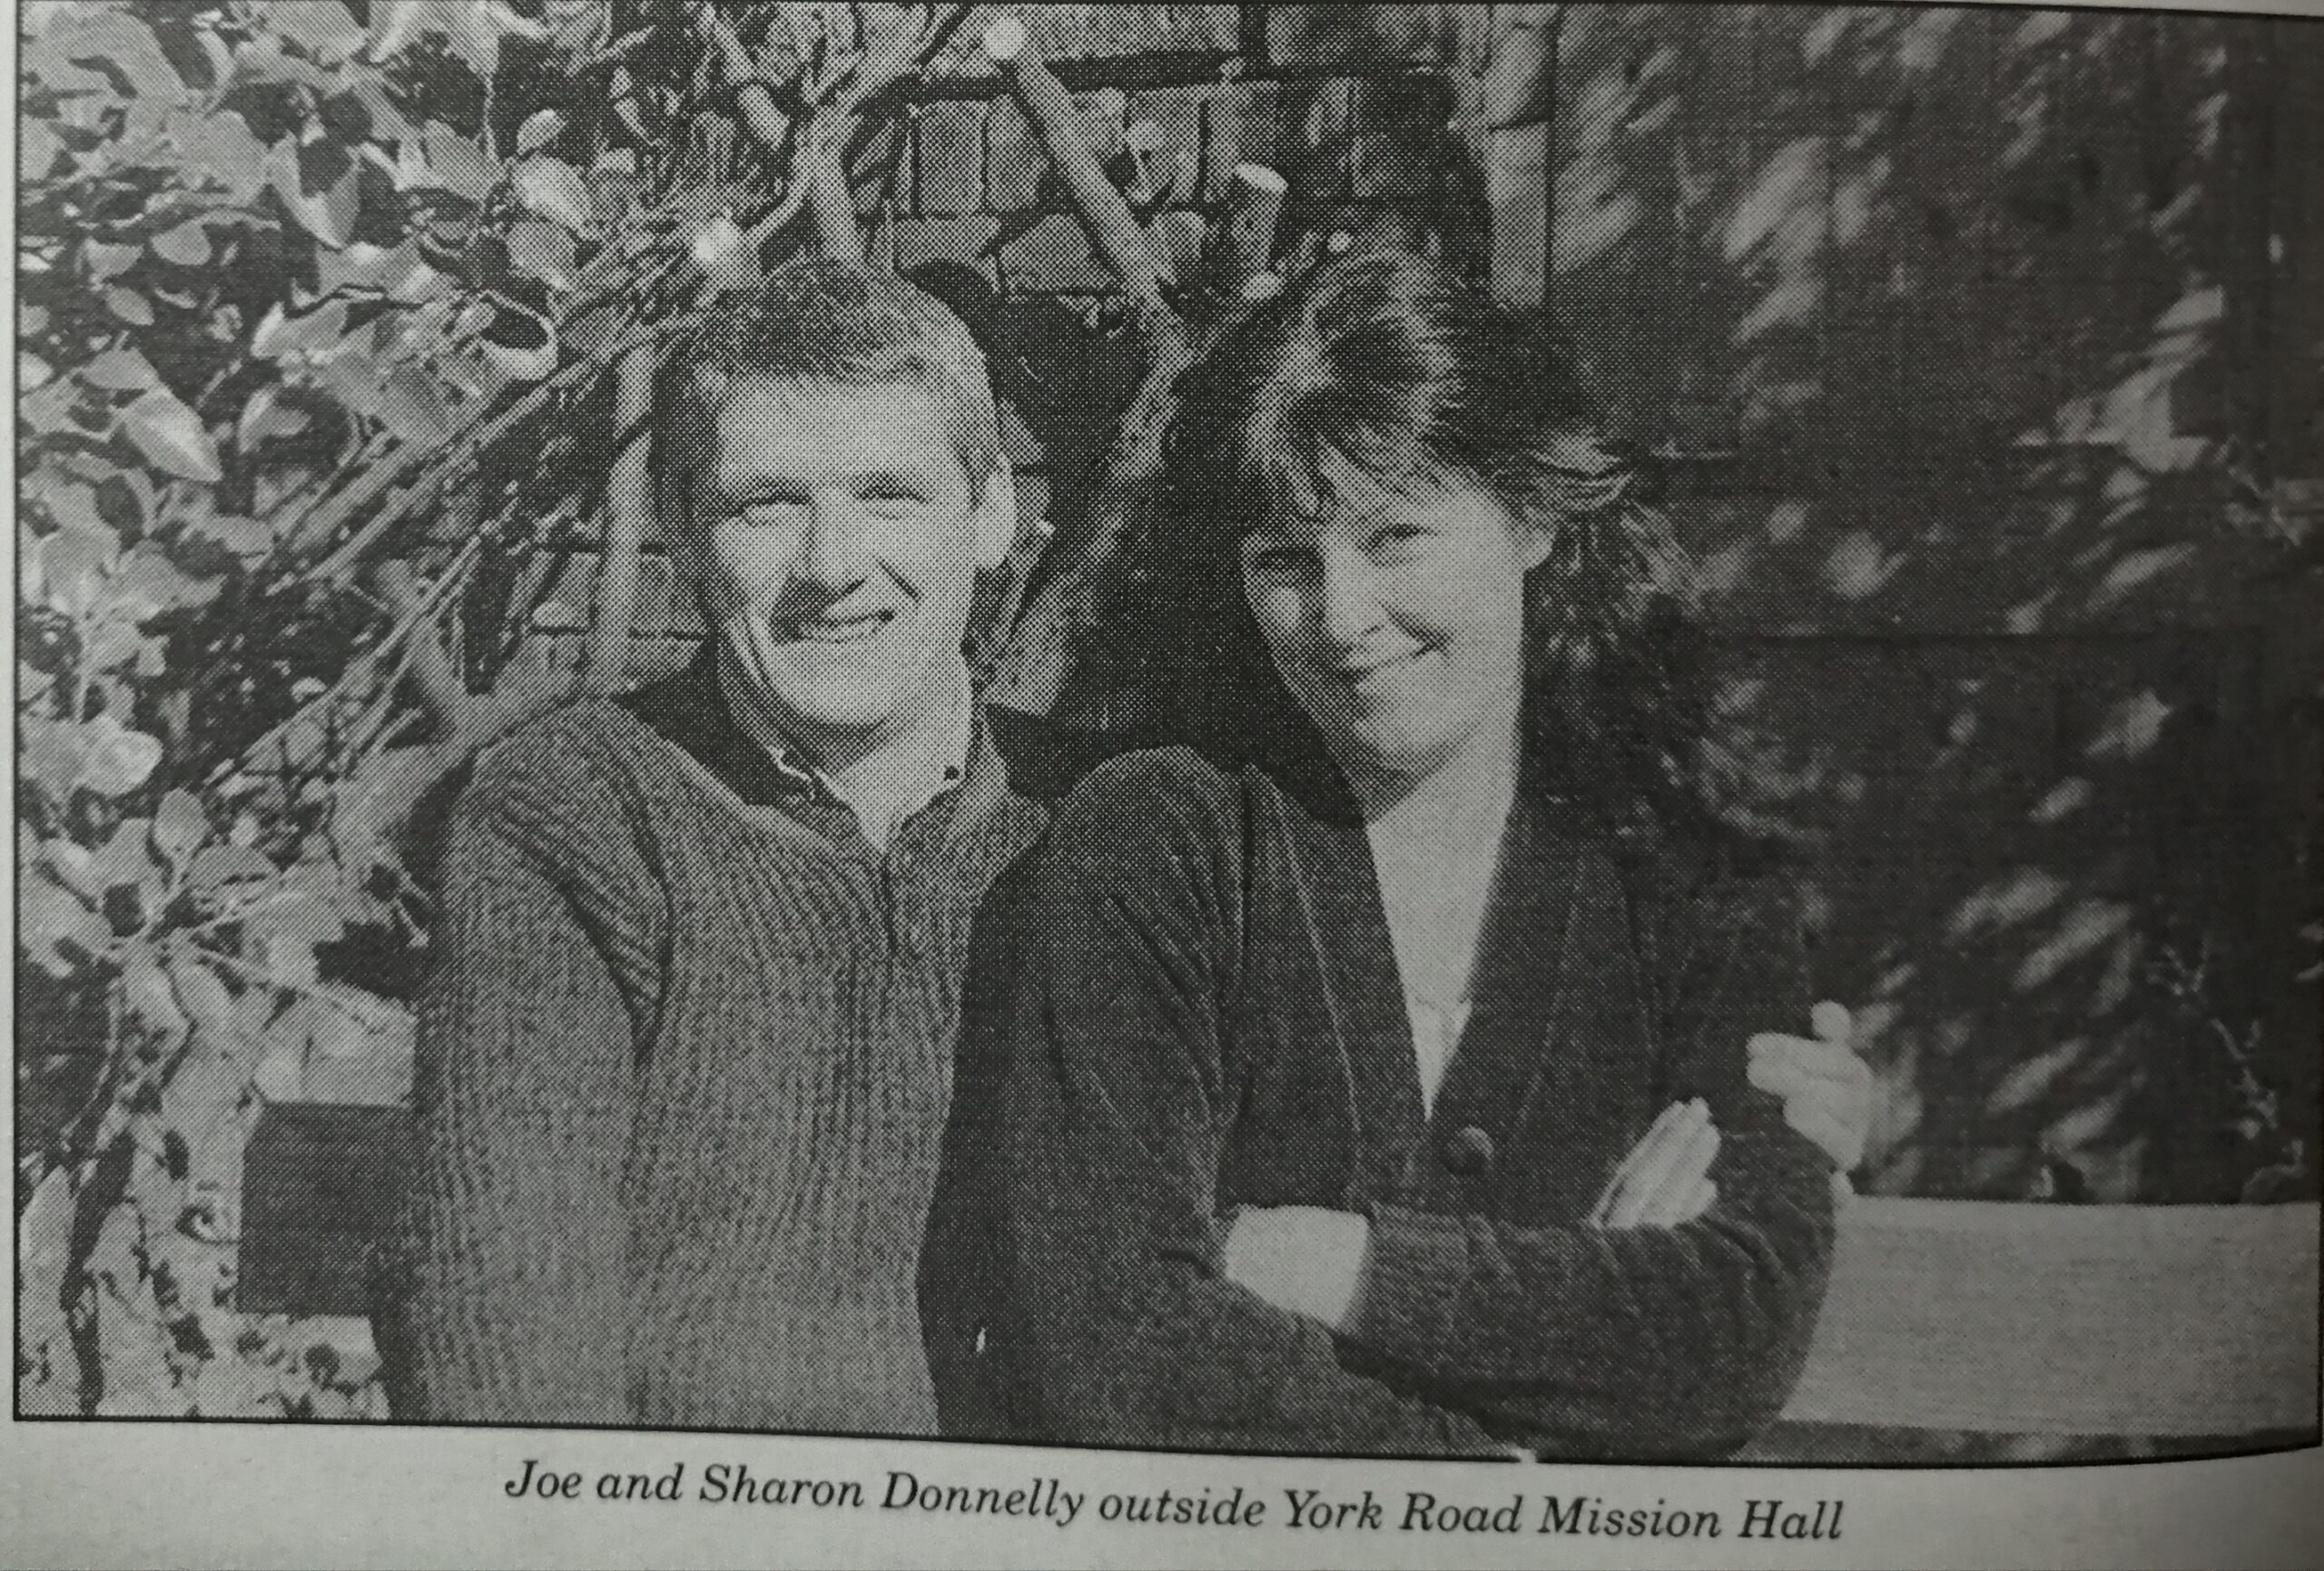 Joe and Sharon Donnelly back in 1998!